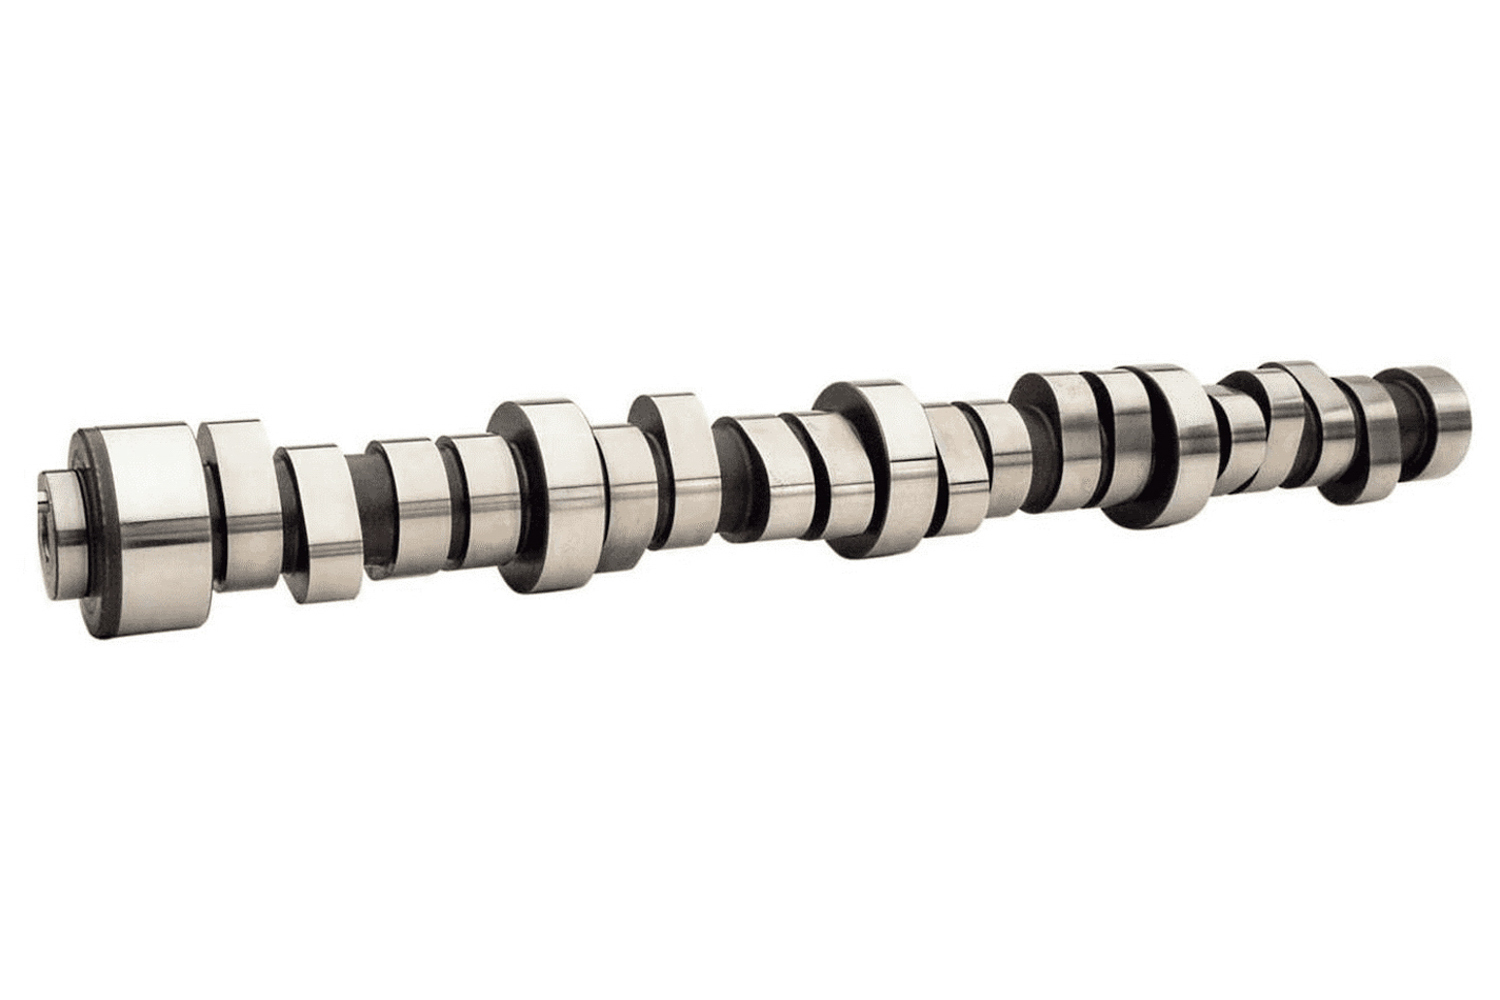 Comp Cams 189-301-13 Camshaft, LST Stage 1, Hydraulic Roller, Lift 0.614 / 0.607 in, Duration 286 / 293, 111.5 LSA, 2000 / 7000 RPM, GM LS-Series, Each